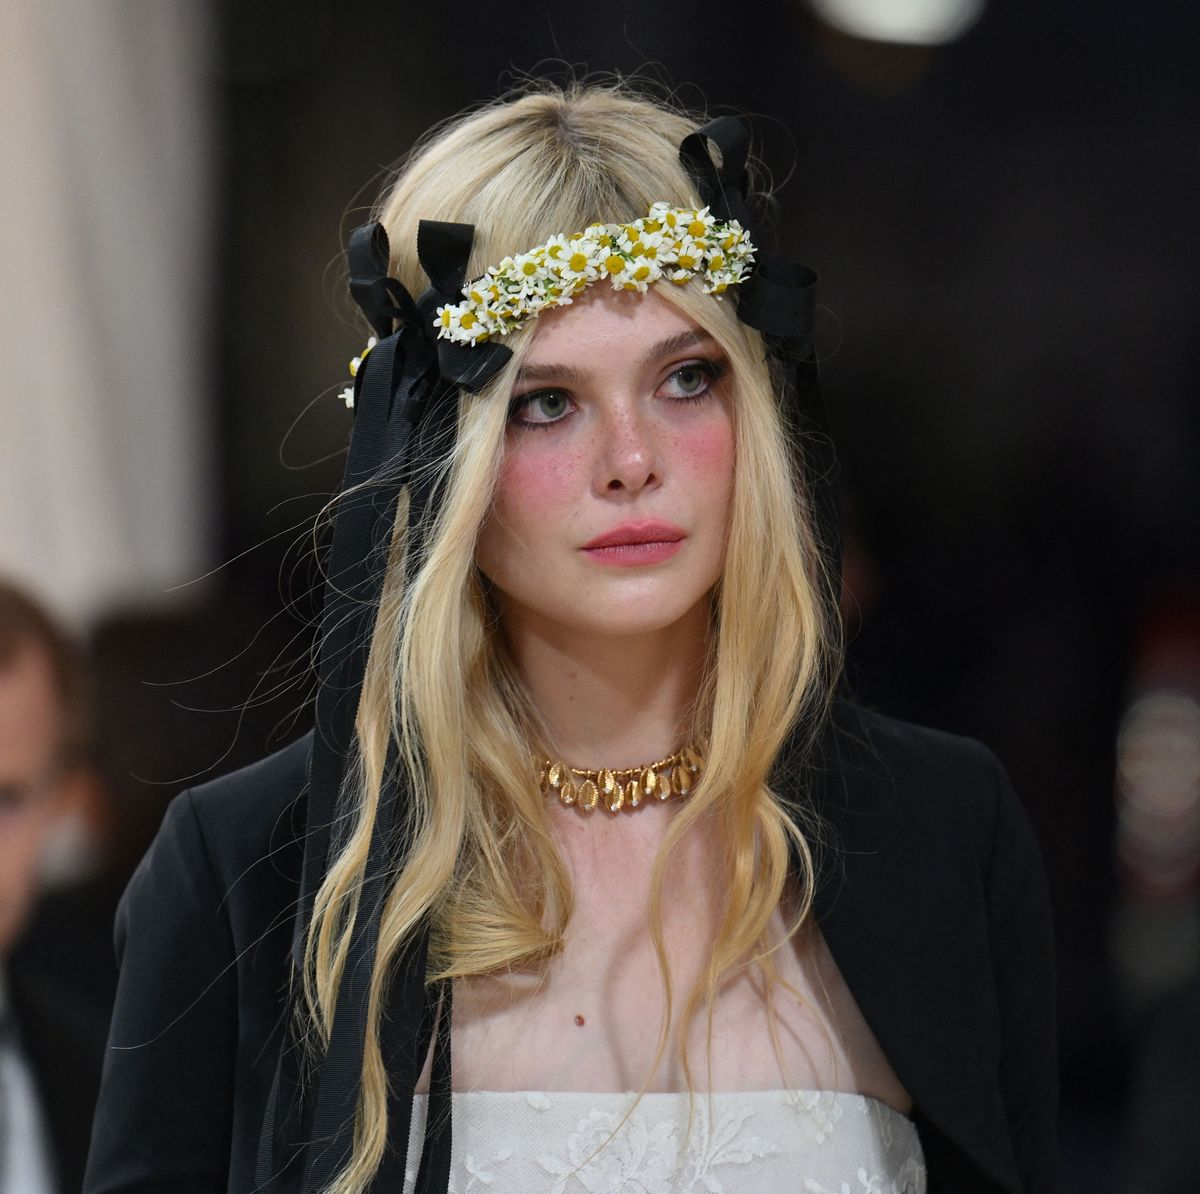 https://hips.hearstapps.com/hmg-prod/images/actress-elle-fanning-arrives-for-the-2023-met-gala-at-the-news-photo-1683905016.jpg?crop=0.627xw:1.00xh;0.188xw,0&resize=1200:*